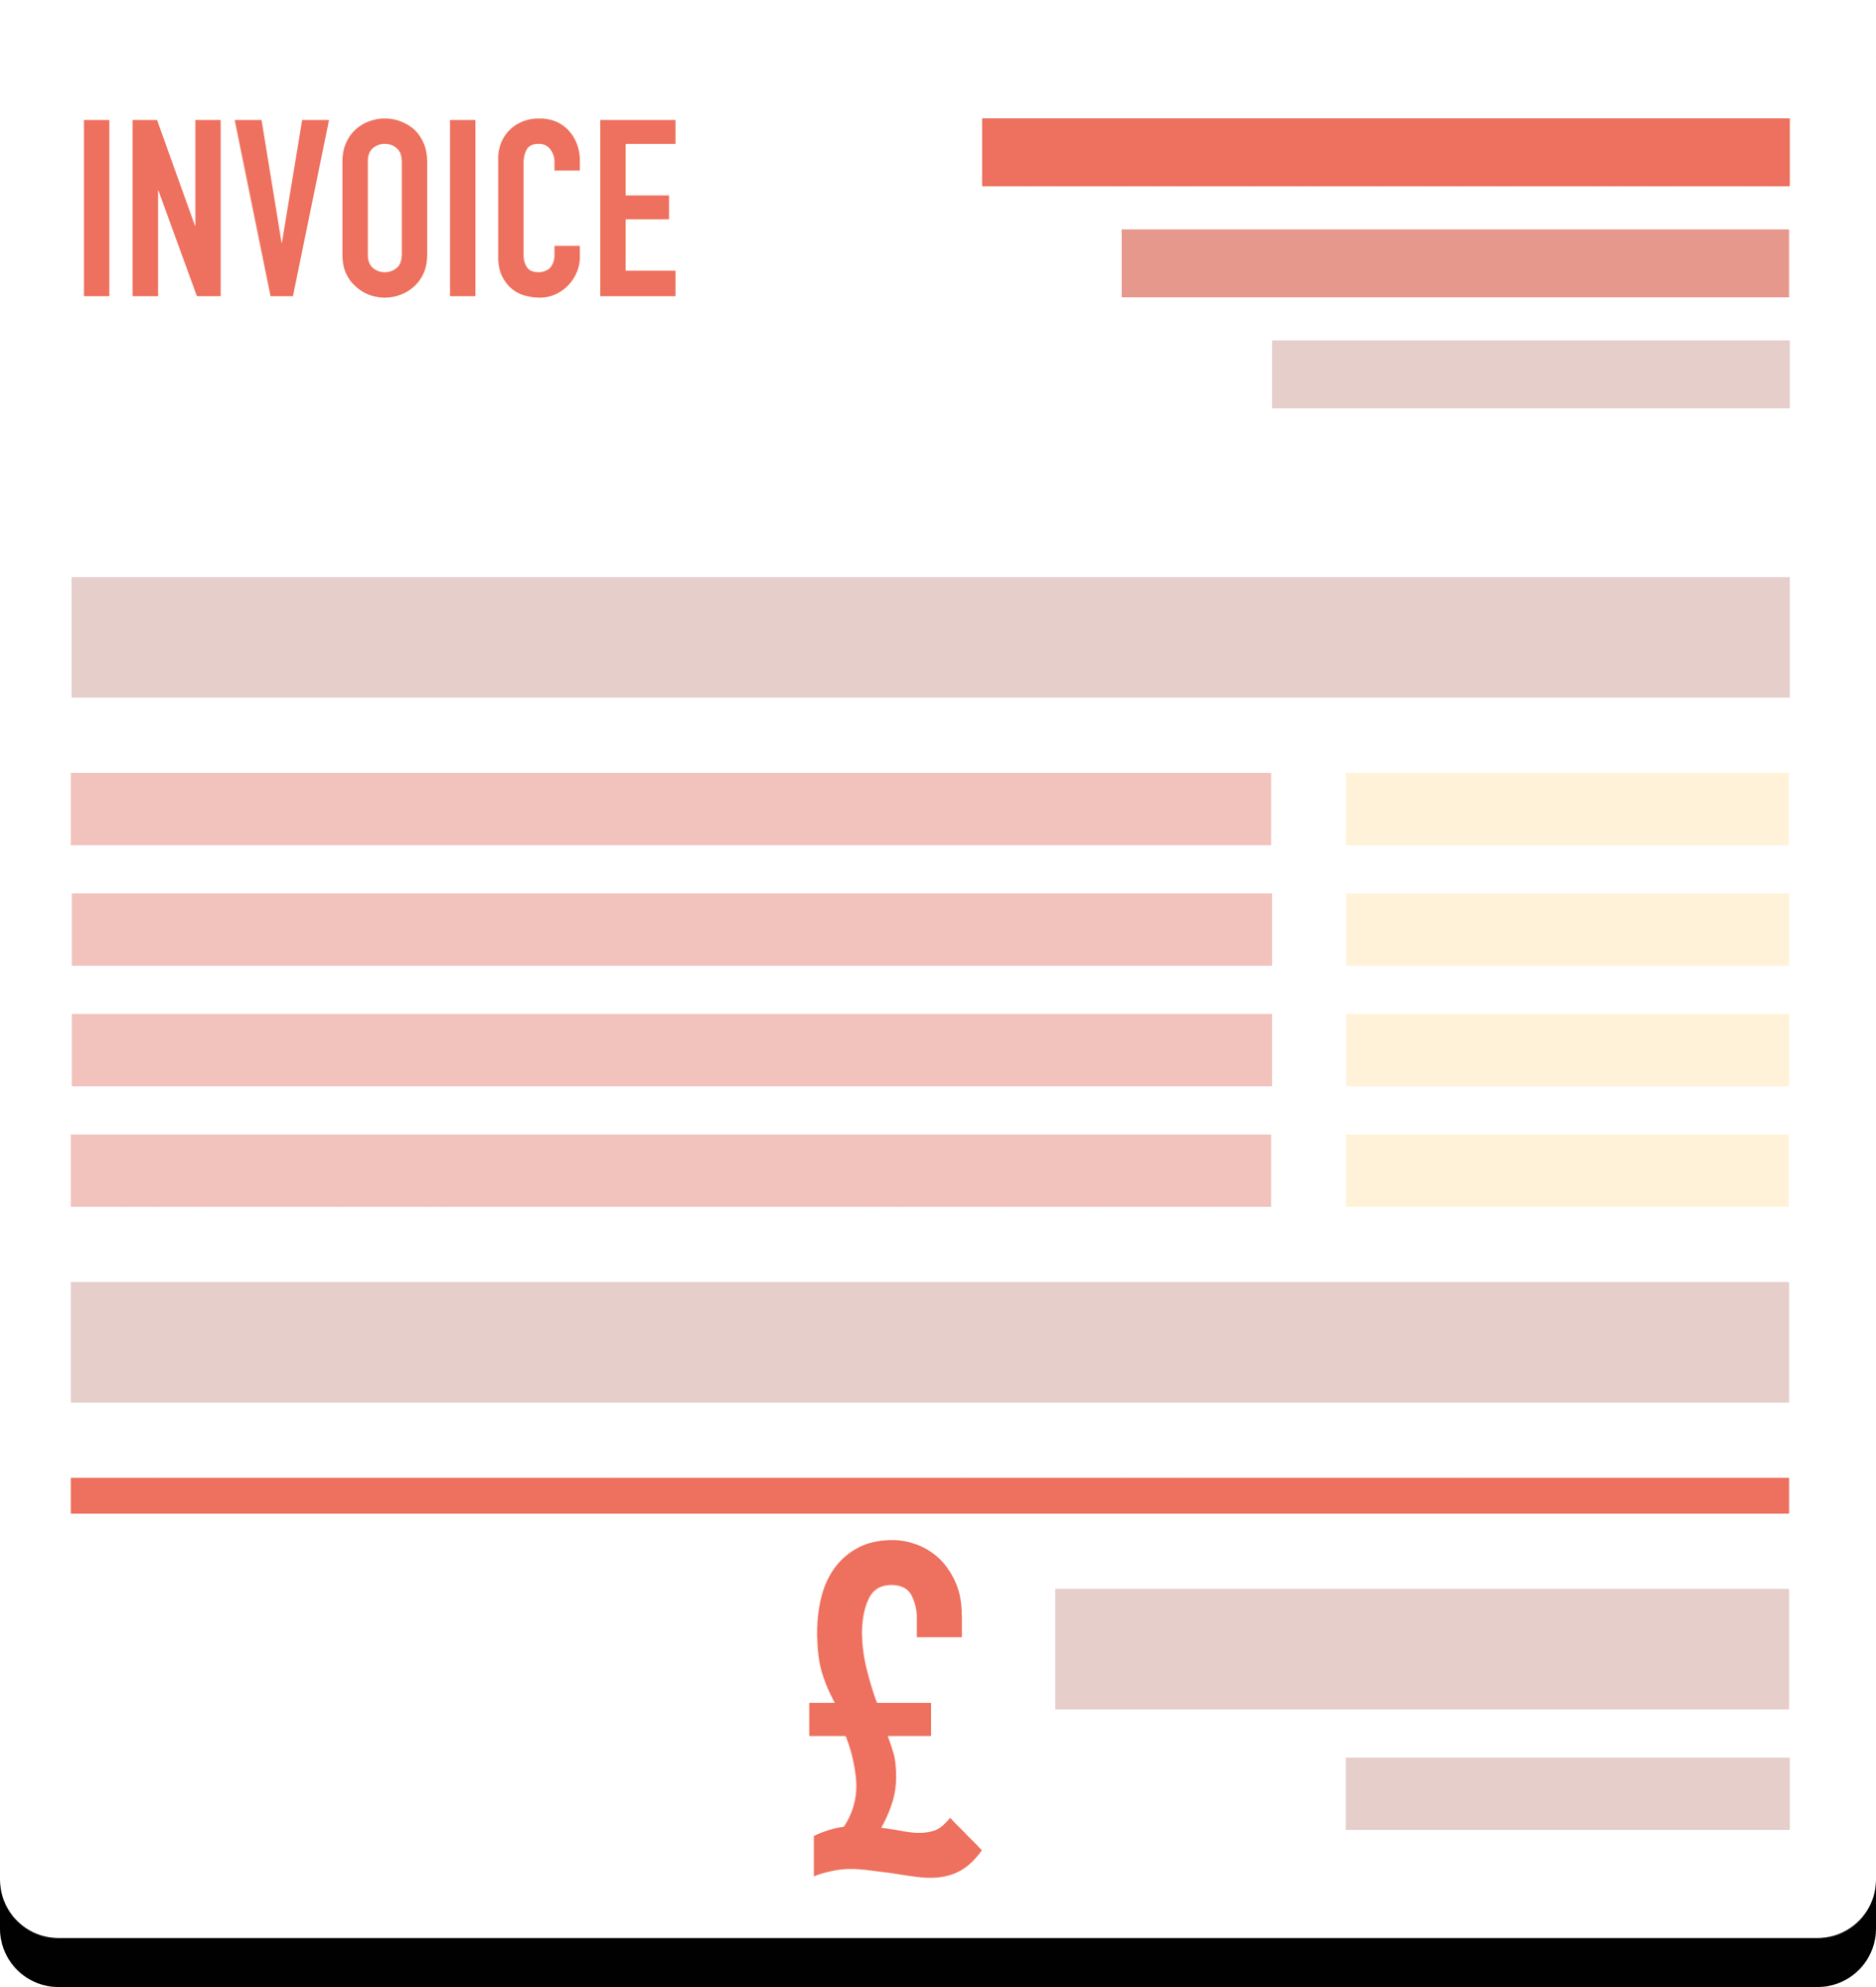 Invoice Template for Window Cleaner